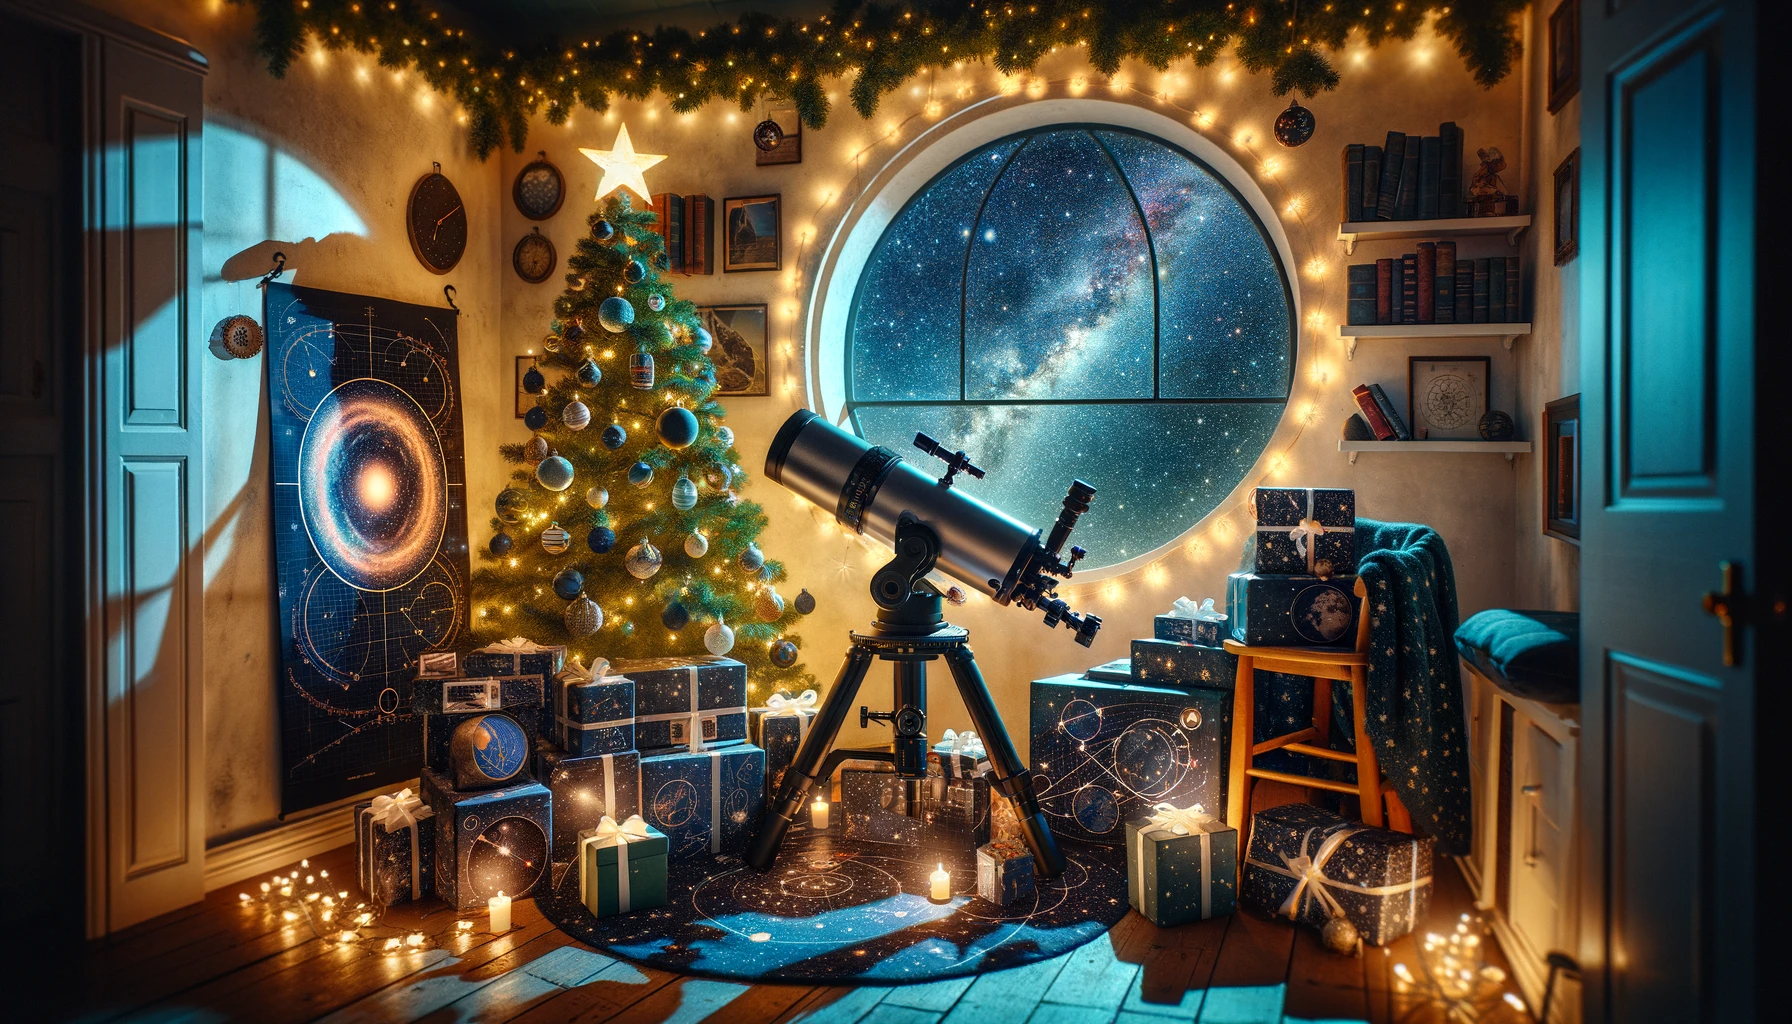 Stargazers’ Delight: A Christmas Gift Guide for Astronomy Enthusiasts